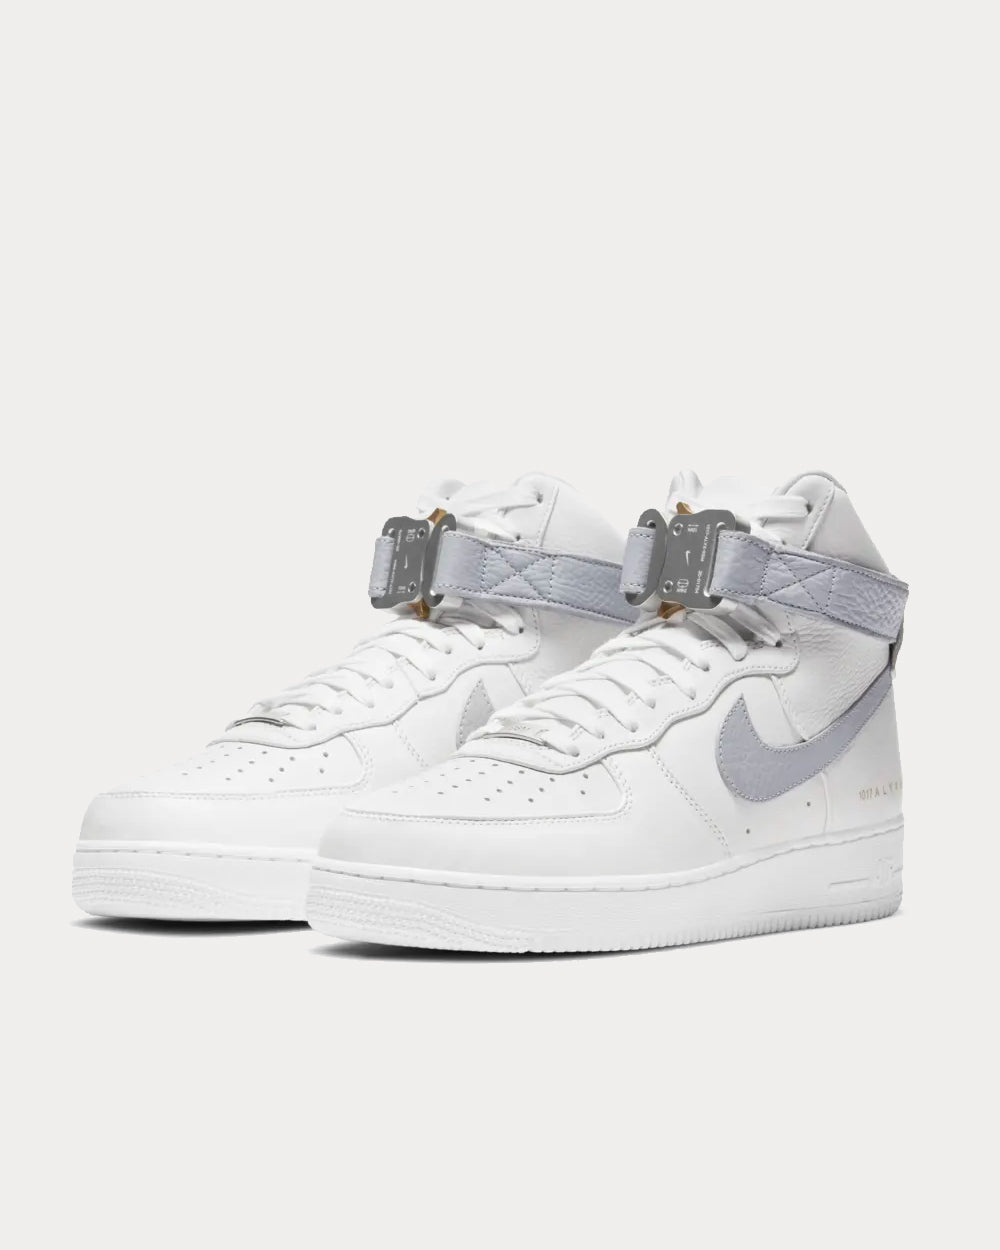 Nike x ALYX - Air Force 1 Wolf Grey High Top Sneakers